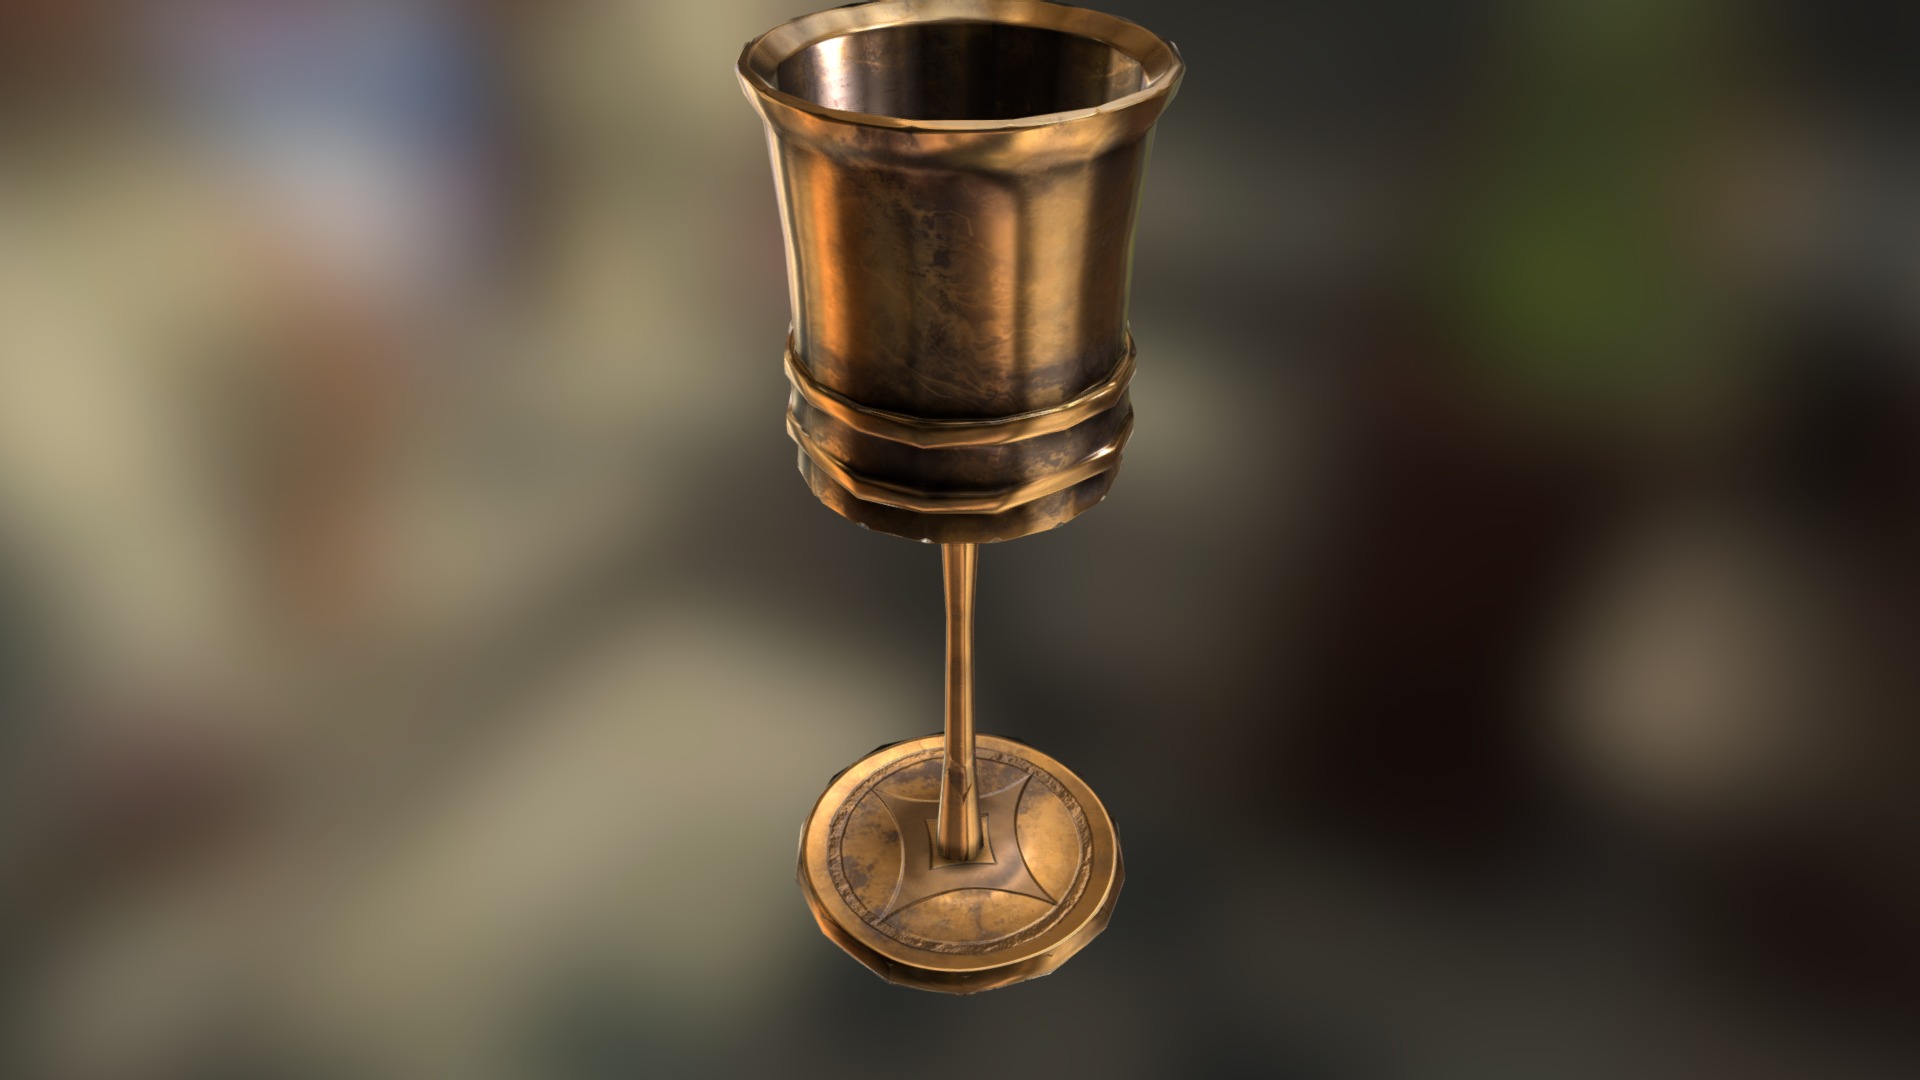 3D model Trinket Brass - This is a 3D model of the Trinket Brass. The 3D model is about a drop of water falling into a glass.